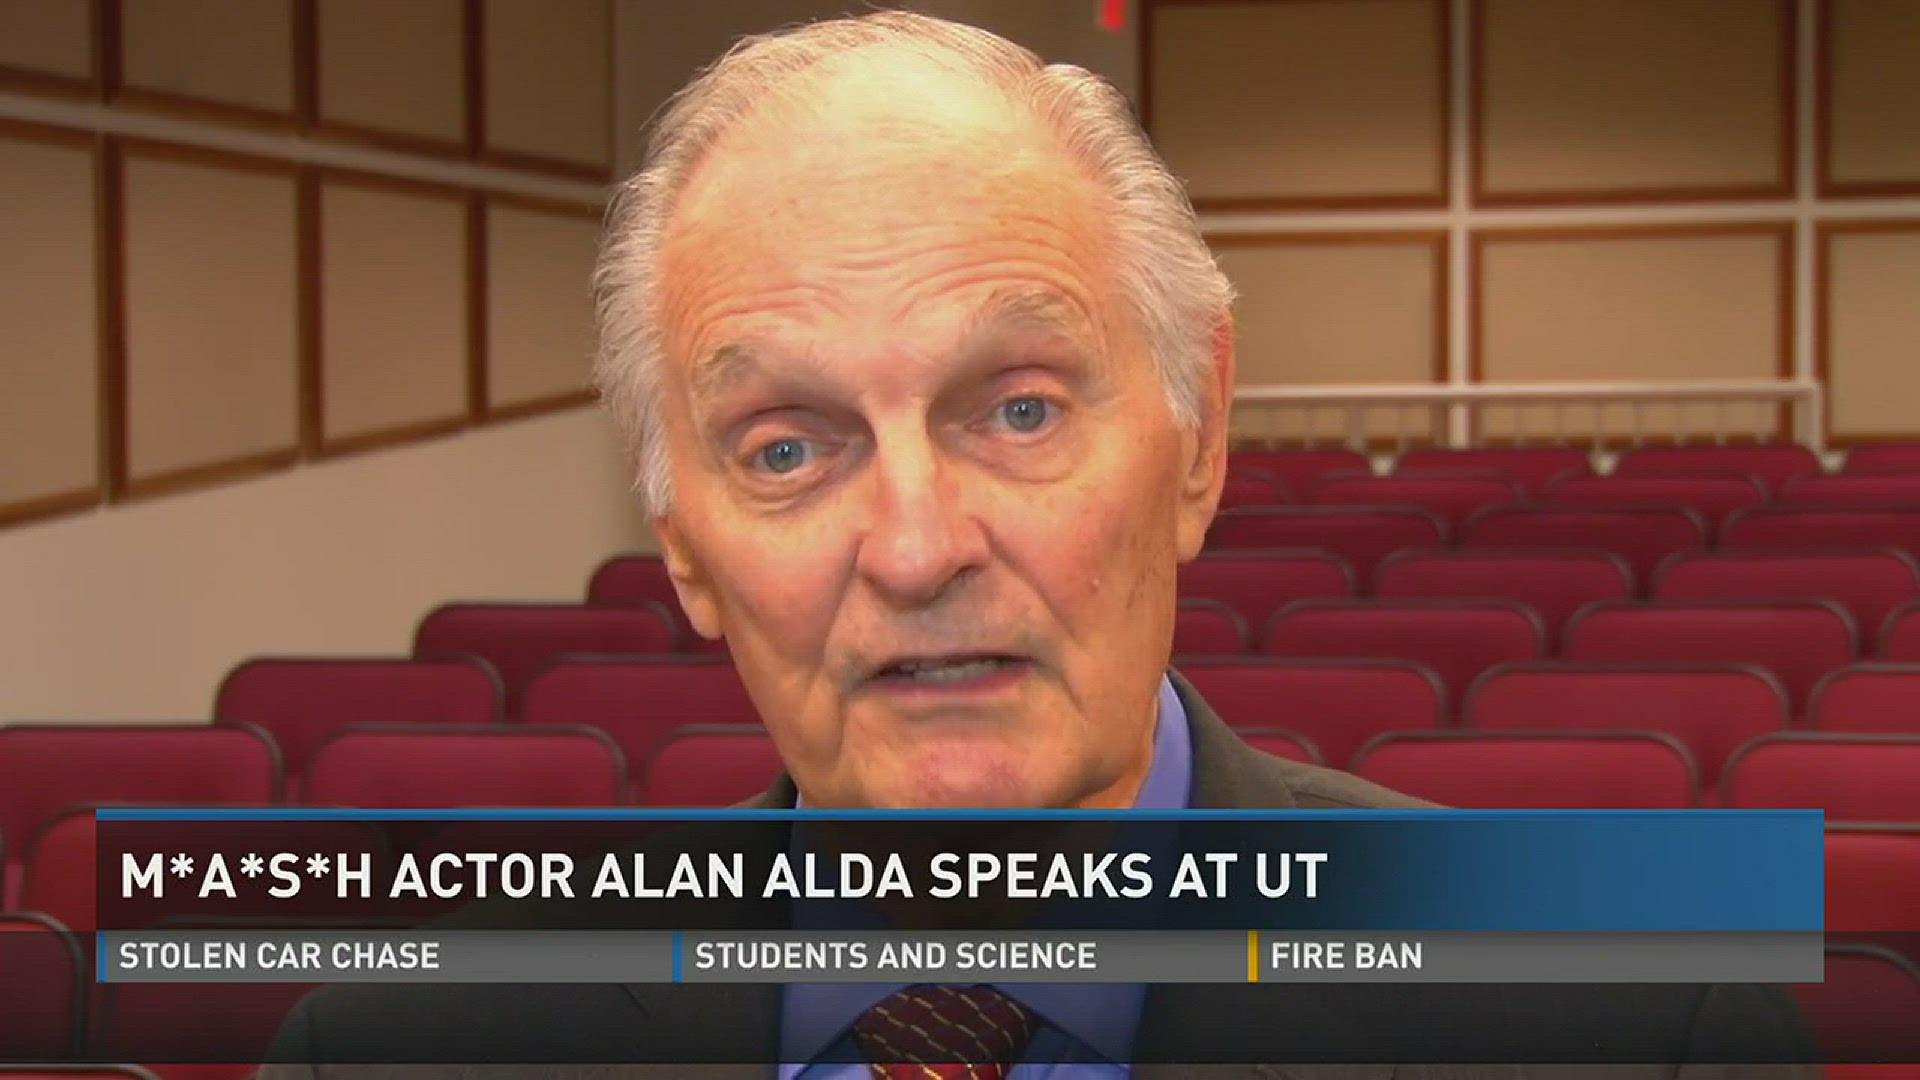 Nov. 1, 2016: M*A*S*H* Actor Alan Alda spoke at the University of Tennessee Tuesday, giving a speech titled "Getting Beyond a Blind Date with Science."